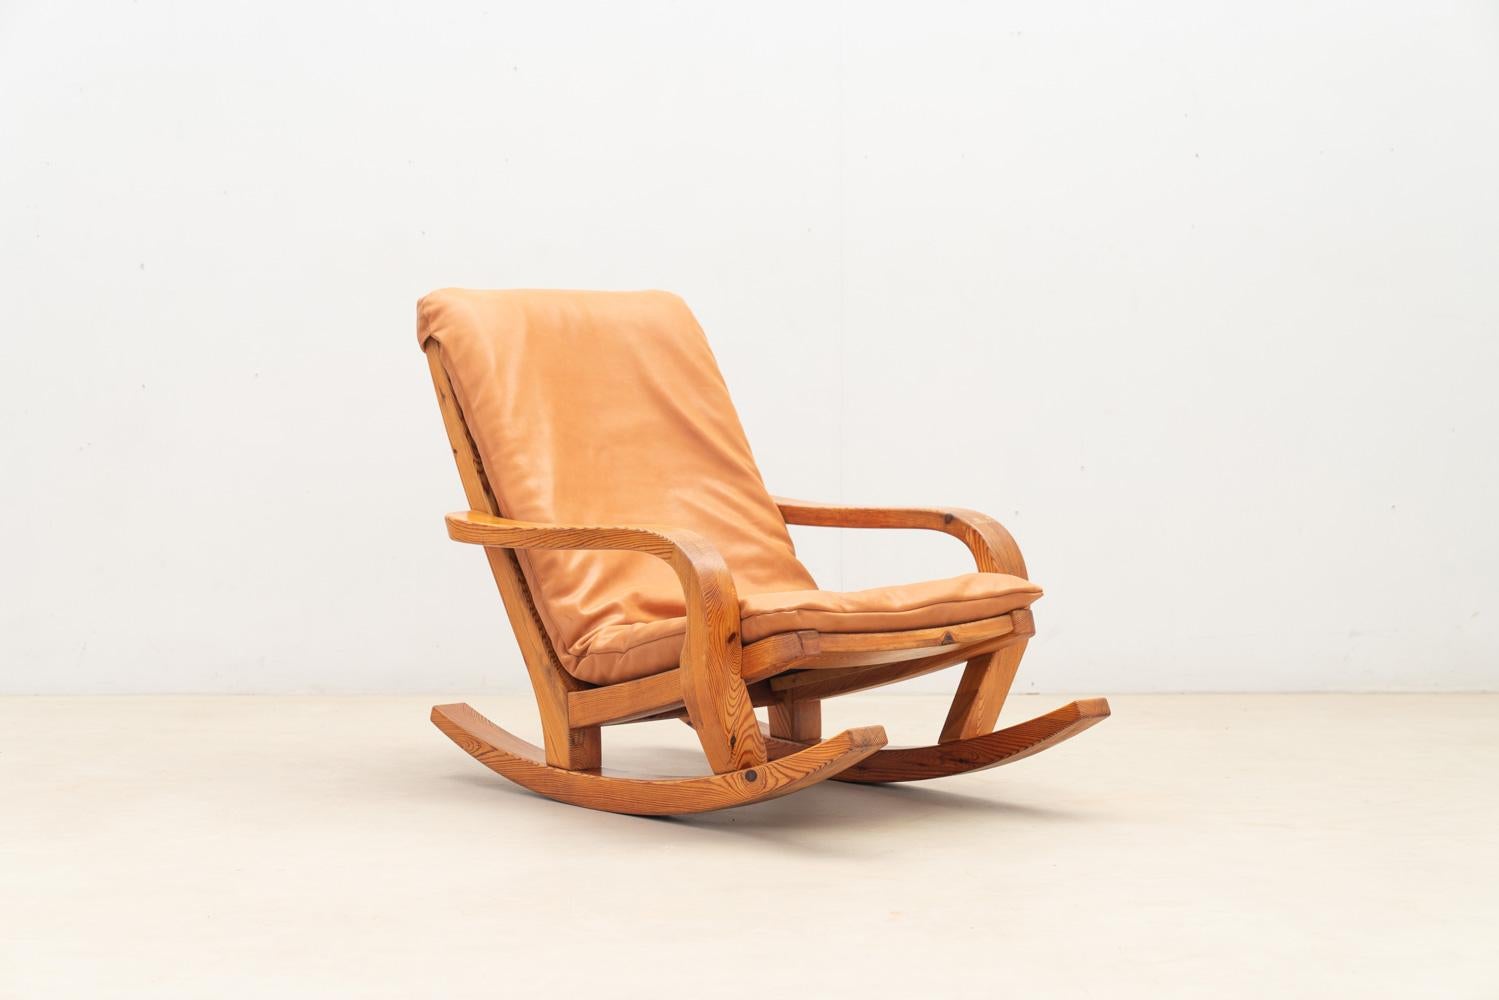 Step back into 1970s France with this rocking chair. Solidly constructed from pine, it is covered with a cushion in new high-quality leather upholstery.

Do not hesitate to contact us for any additional information. We would be more than delighted